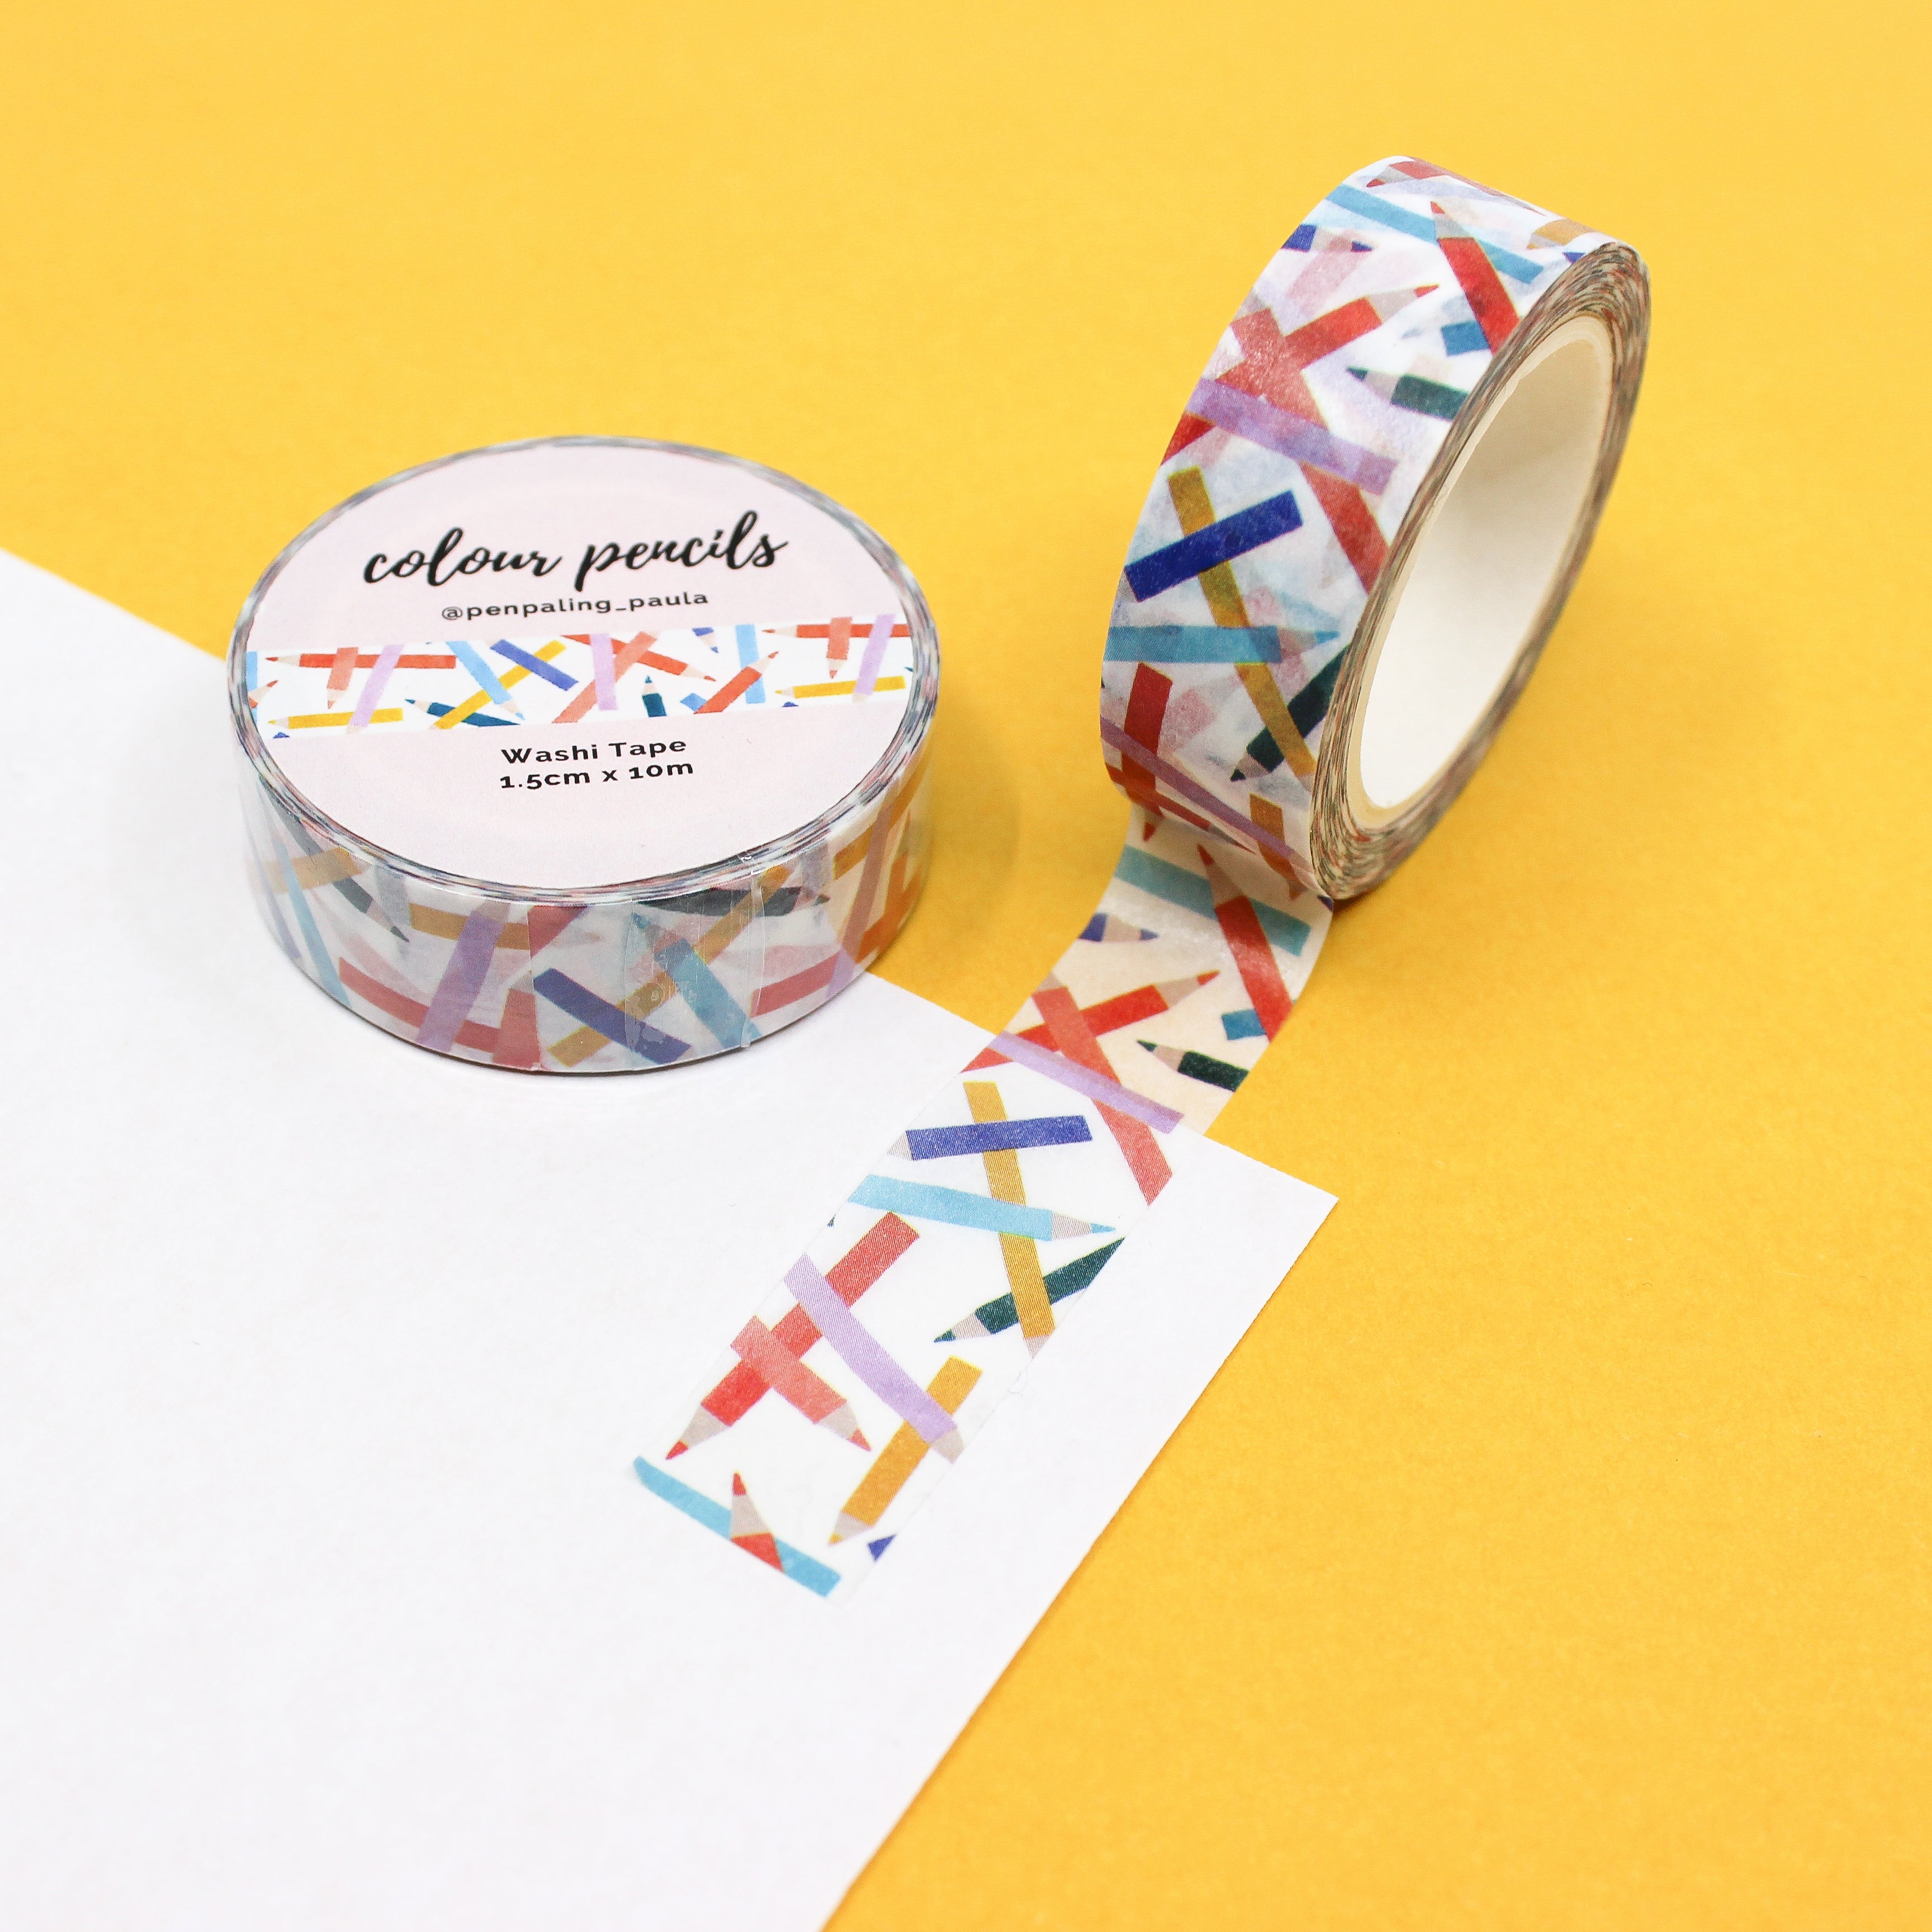 This is a colorful pencils themed washi tape from BBB Supplies Craft Shop